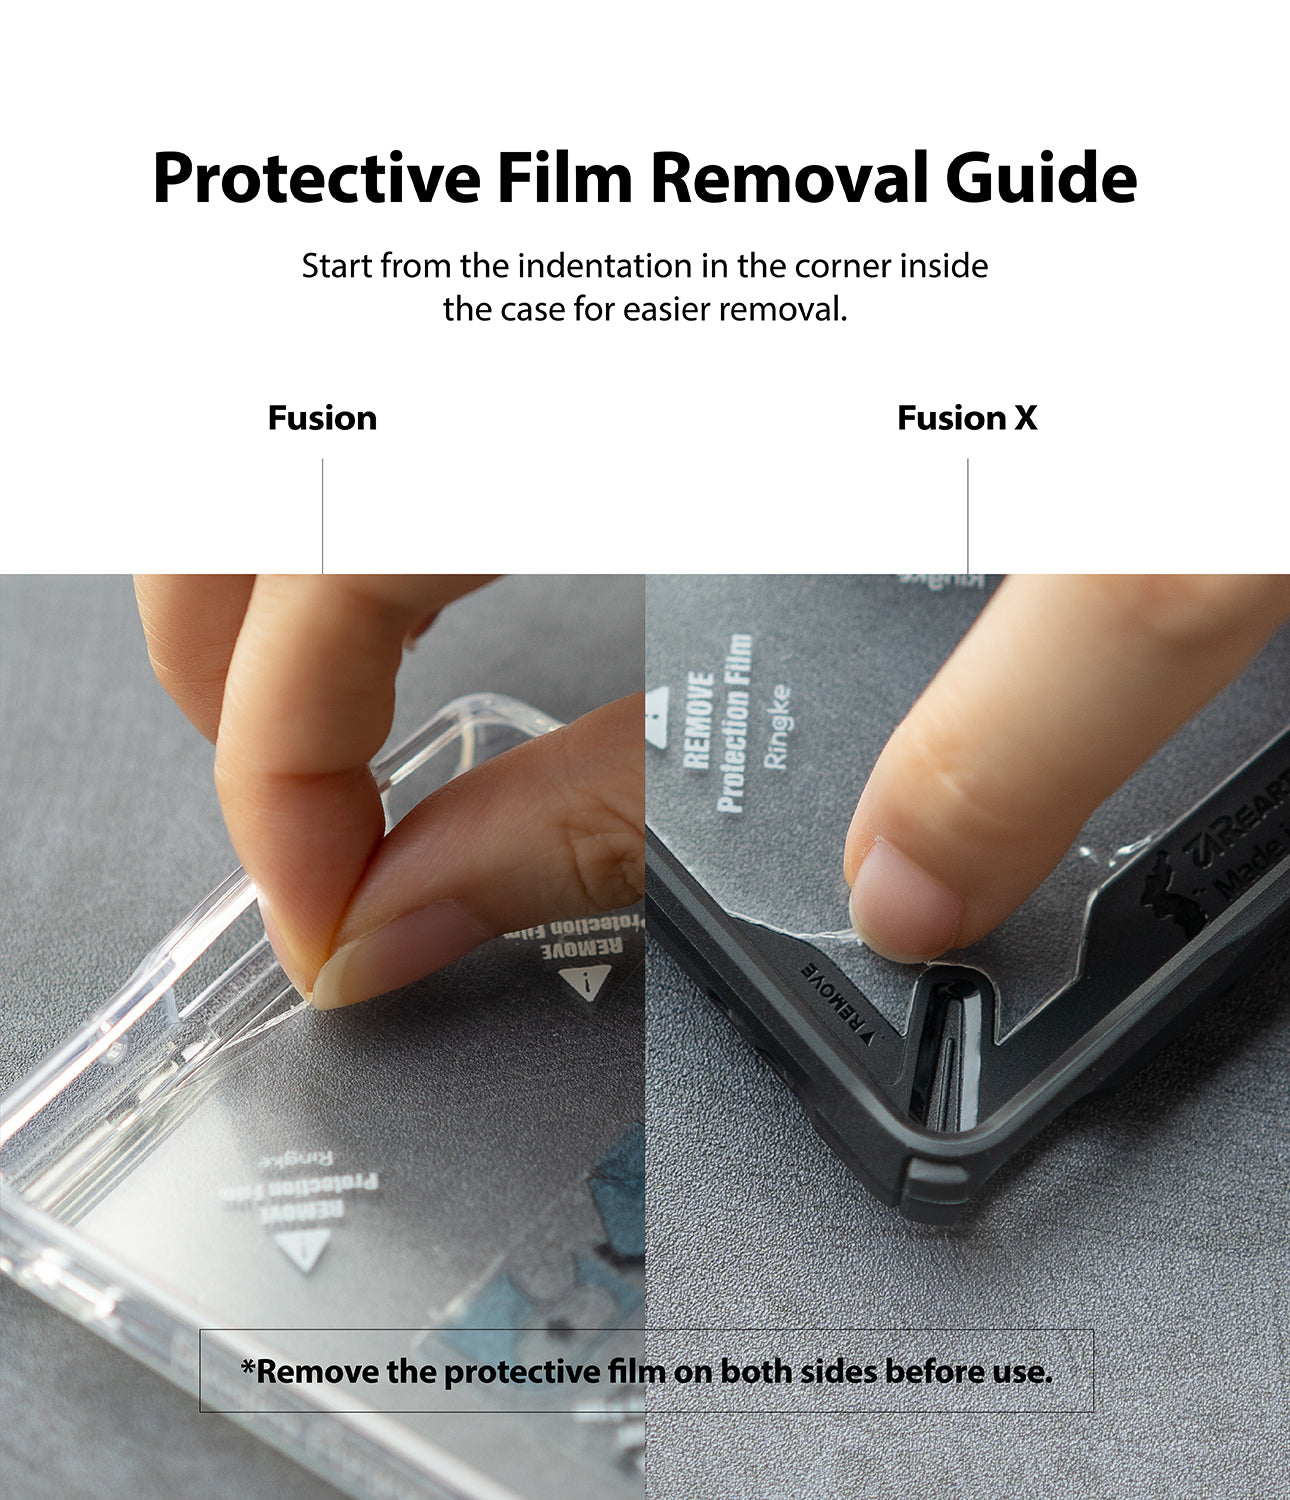 protective film removal guide - start from the indentation in the corner inside the case for easier removal